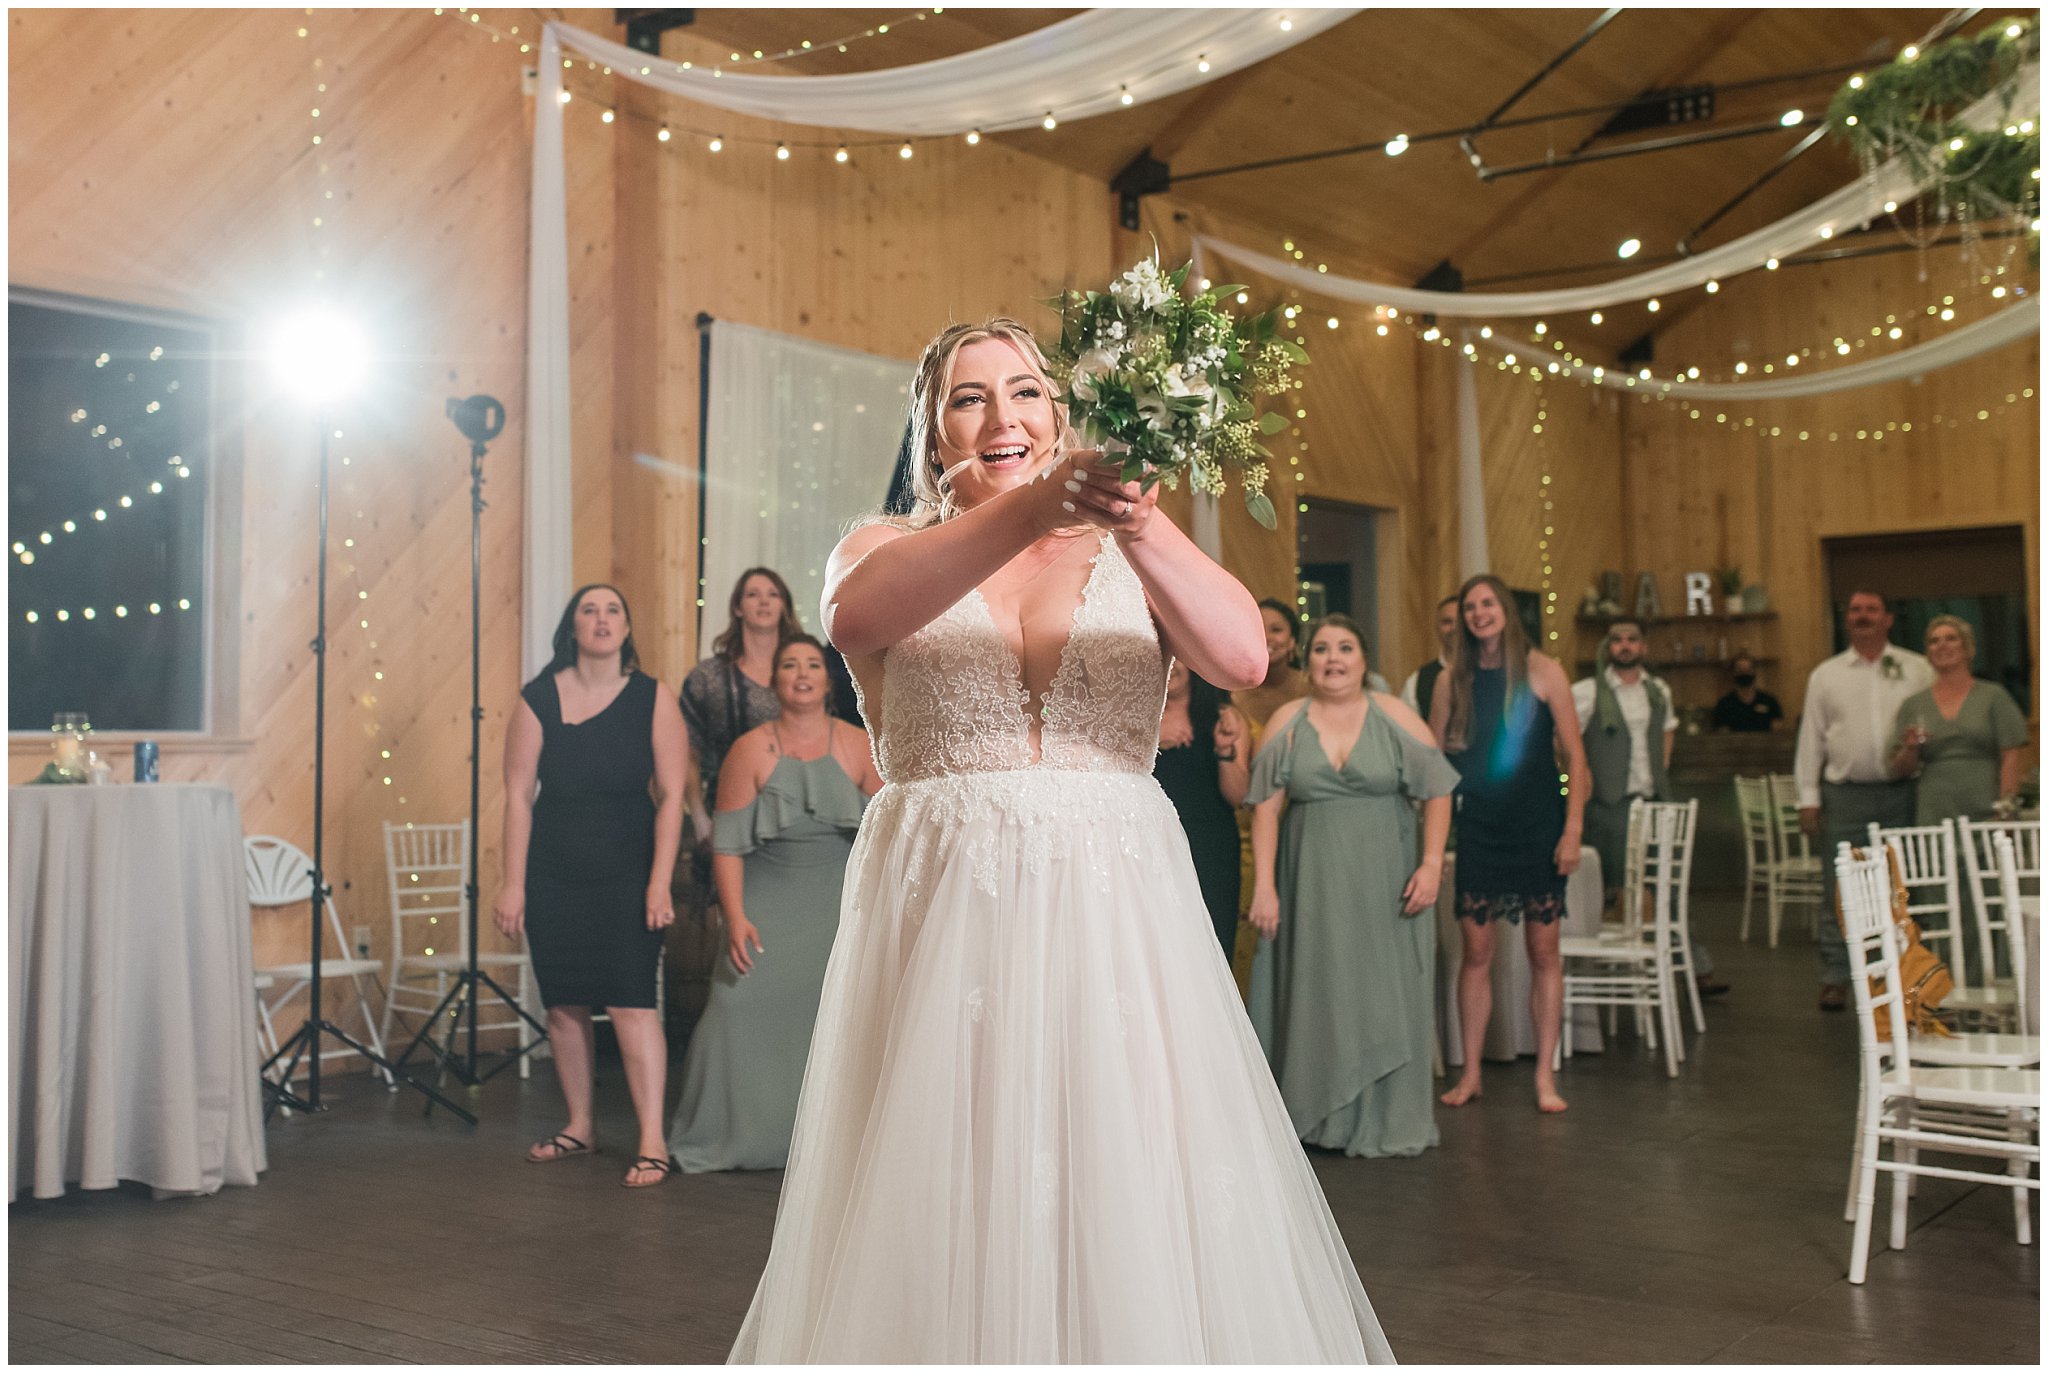 Bouquet toss in a barn during wedding reception | Sage Green and Gray Summer Wedding at Oak Hills | Jessie and Dallin Photography